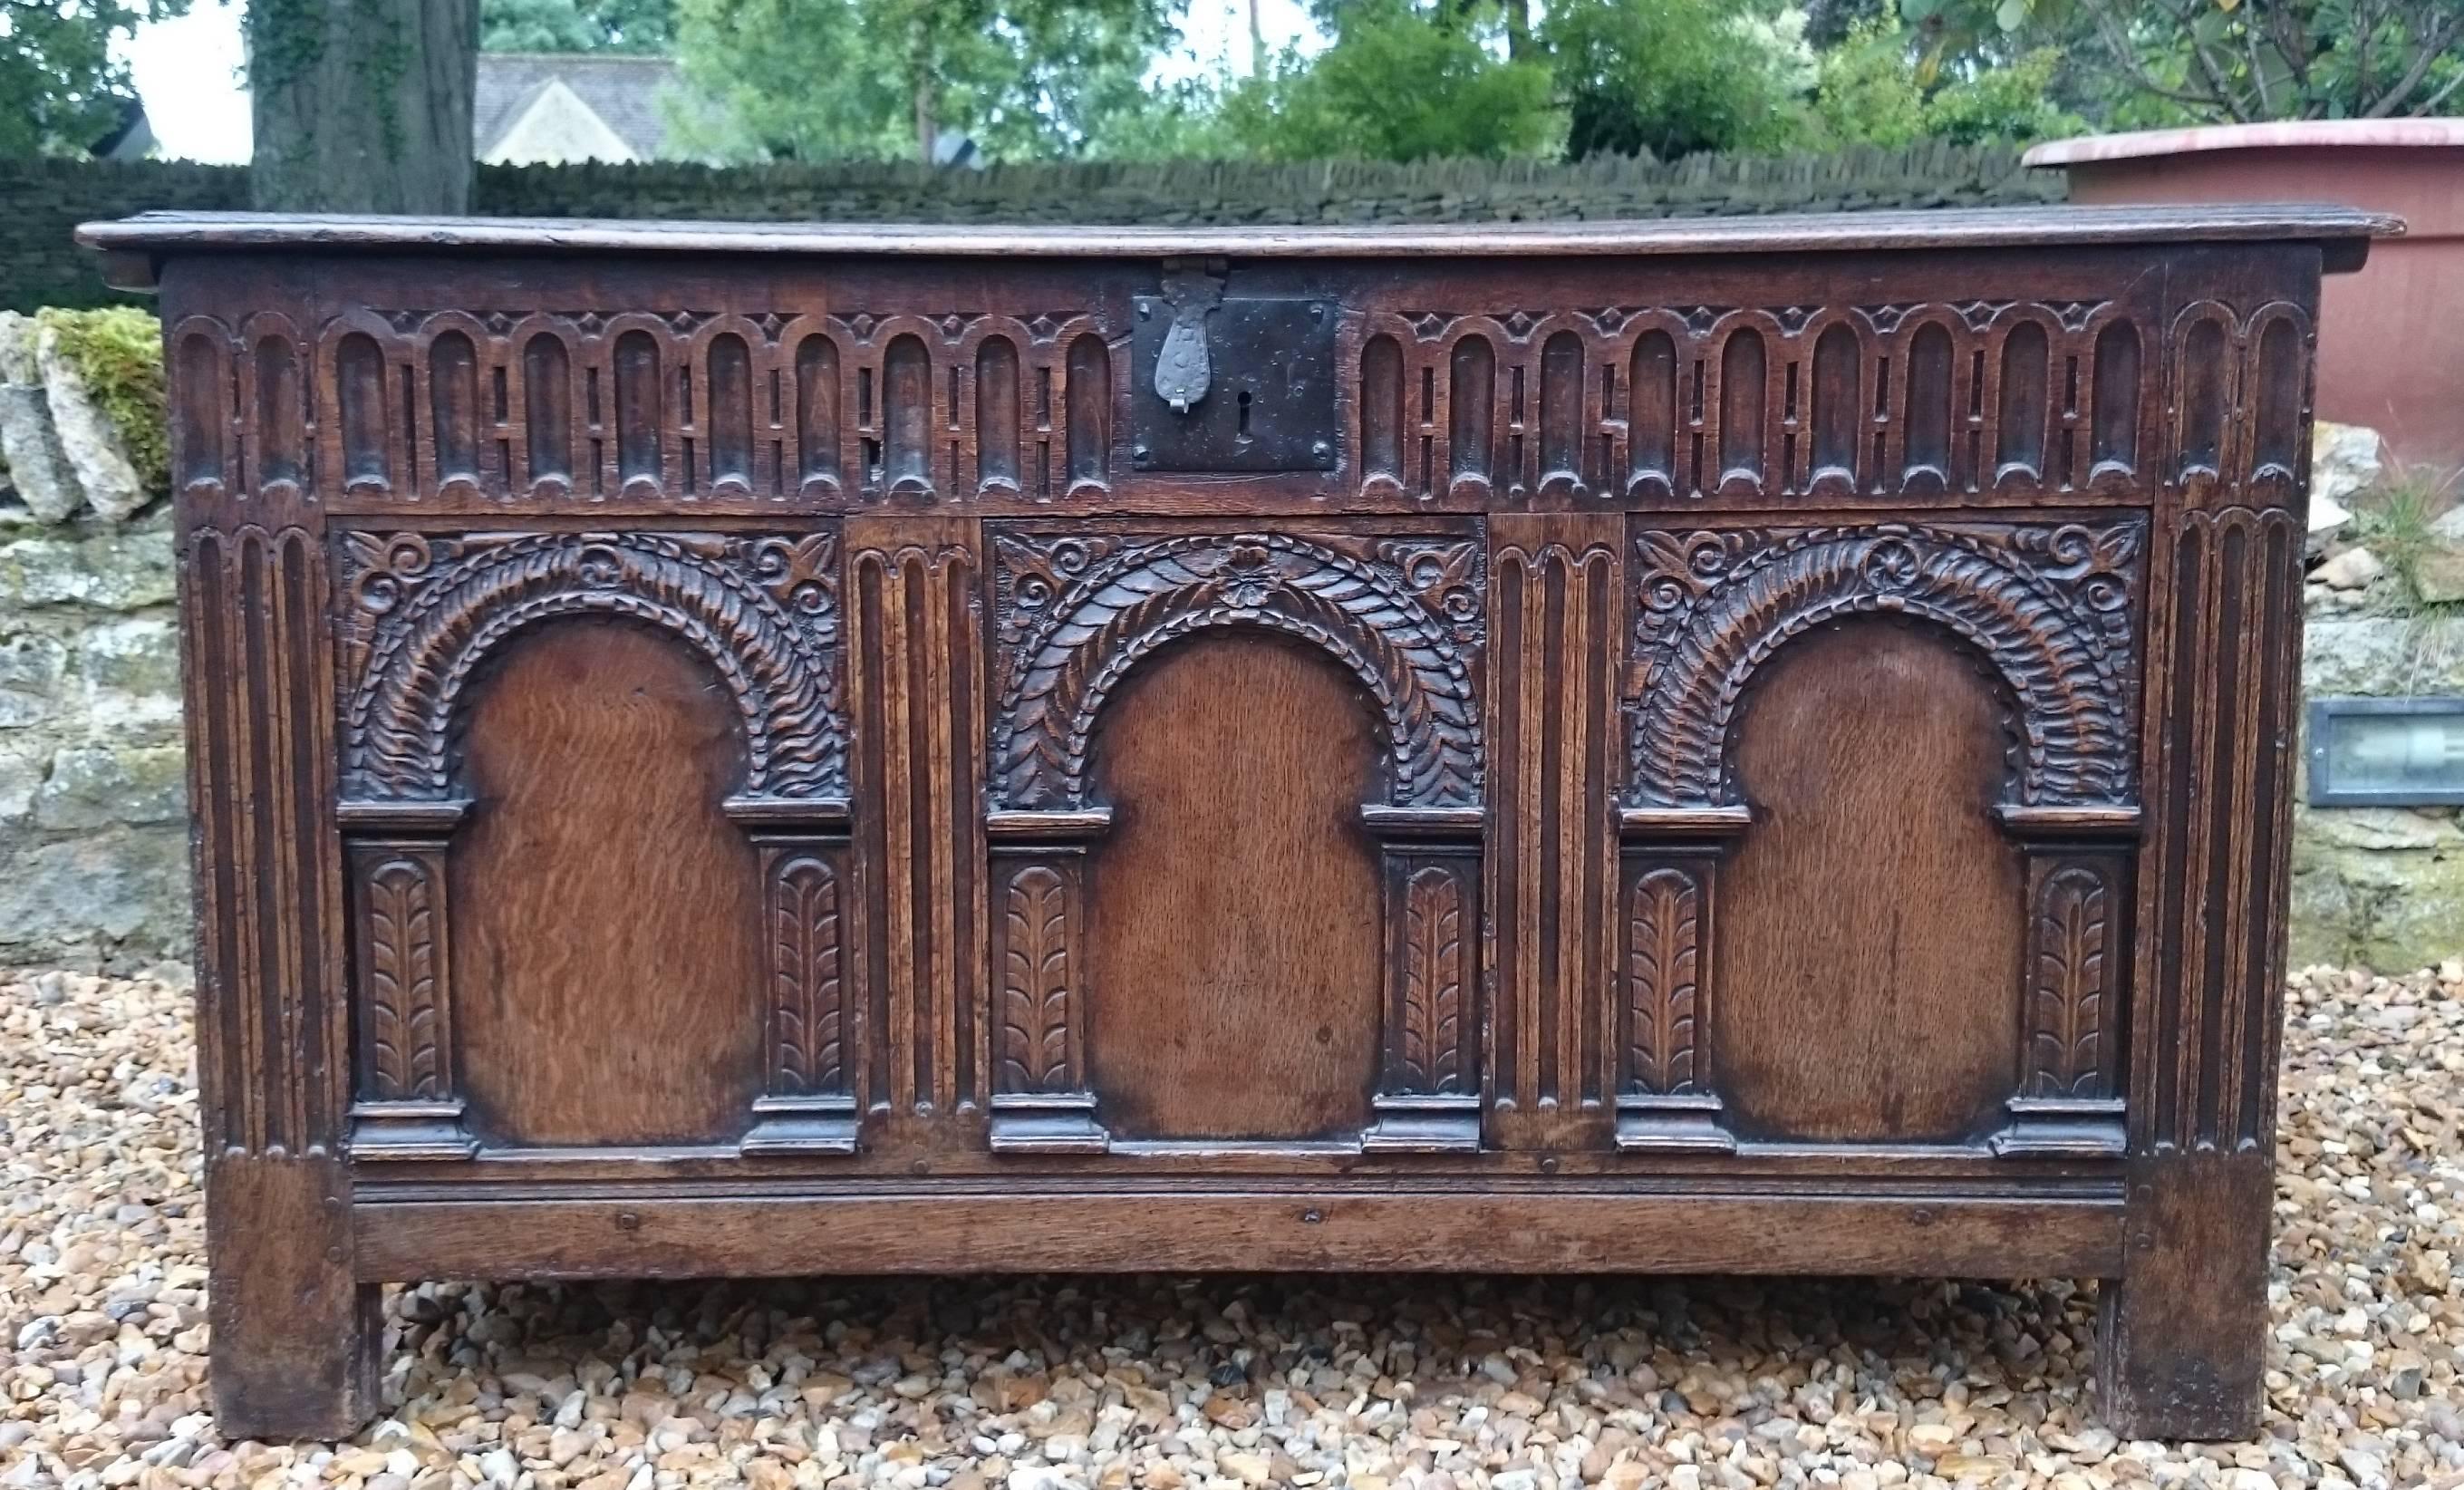 This is an especially fine 17th century oak coffer. It is finely carved with fluted pilasters and arched panels. The oak is a wonderful colour to which these photographs to not do justice. The lock and hinges look original, although the hinges may